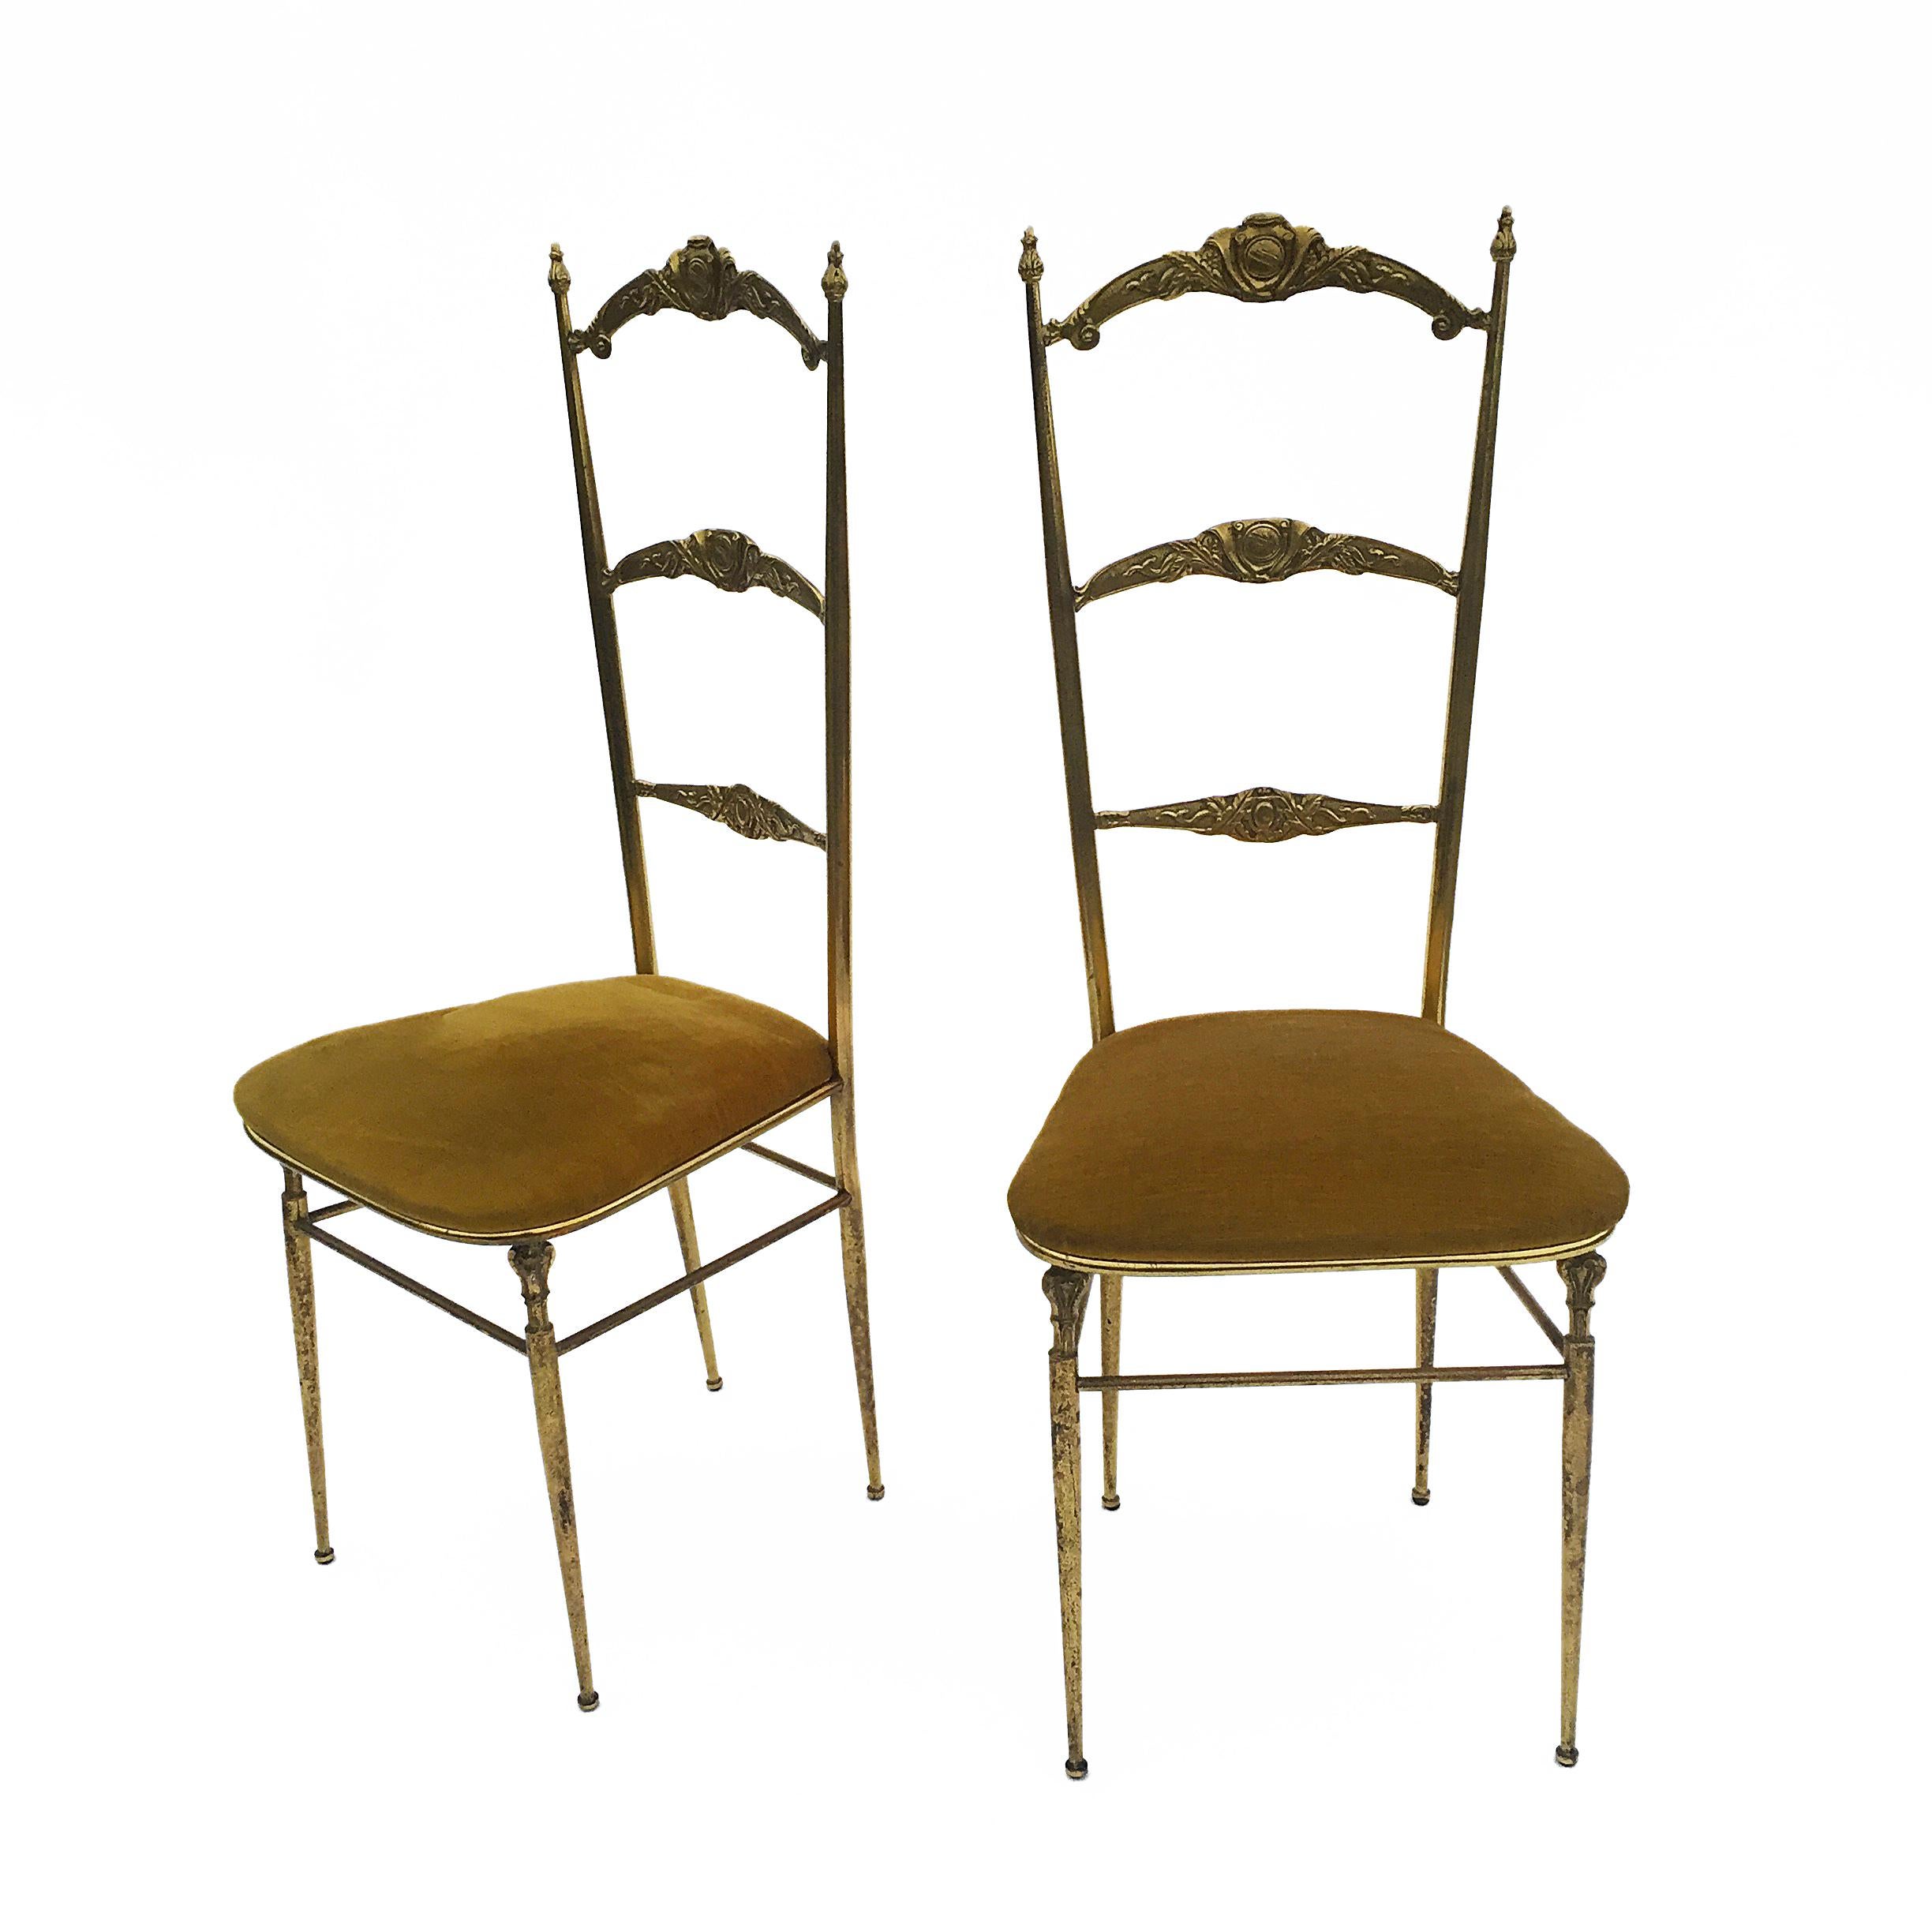 Hollywood Regency Mid-Century Pair Of Chiavari Style Brass Ladder Accent Side Chairs, 1950s